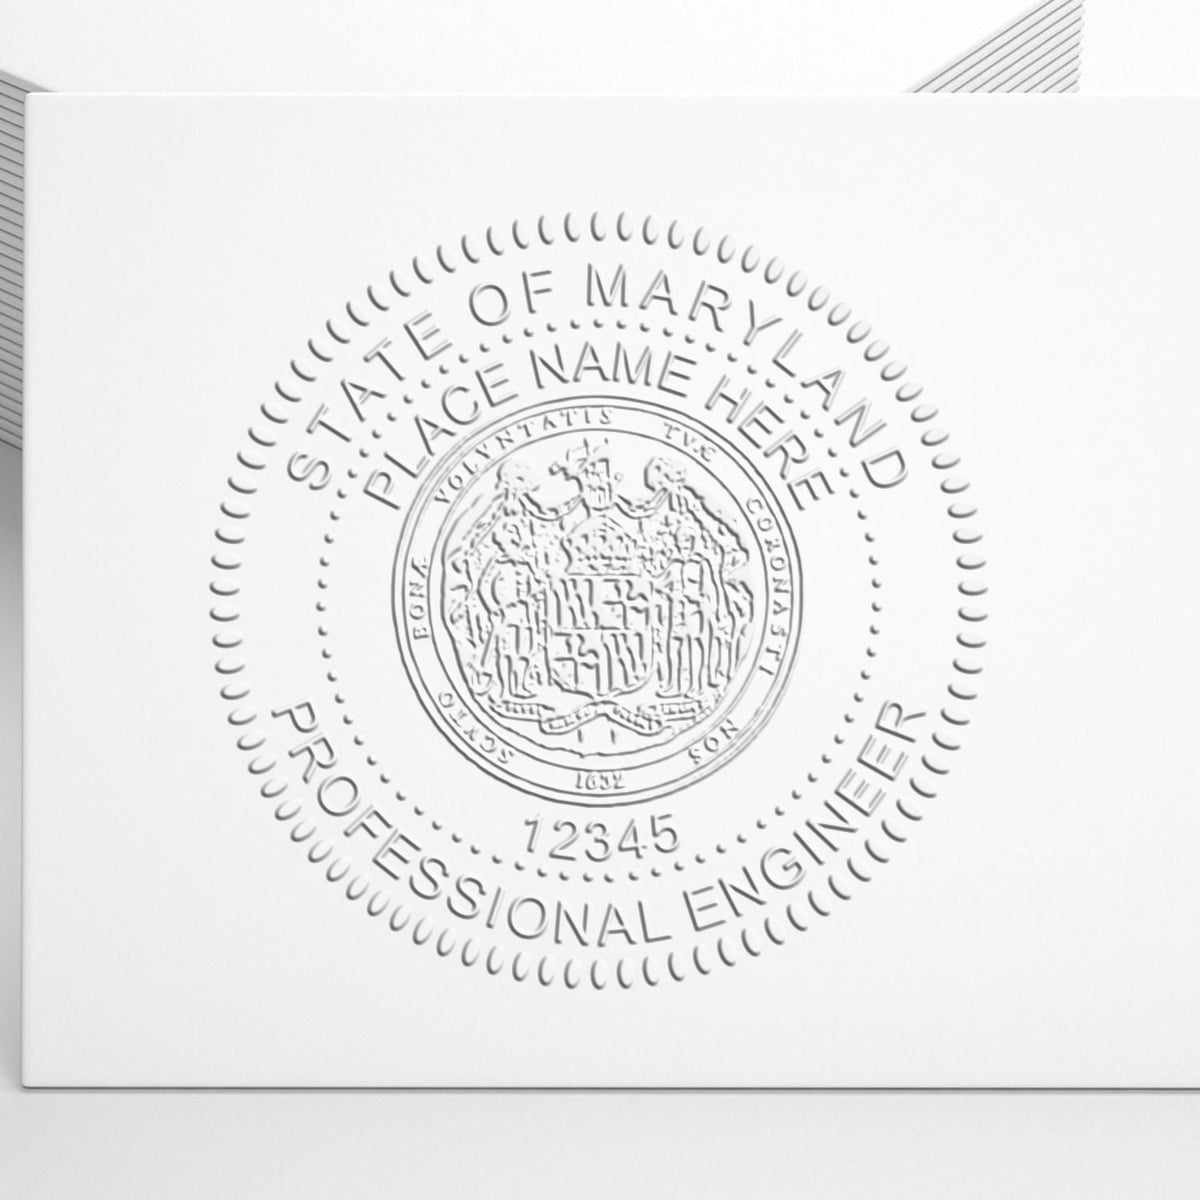 A stamped impression of the Soft Maryland Professional Engineer Seal in this stylish lifestyle photo, setting the tone for a unique and personalized product.